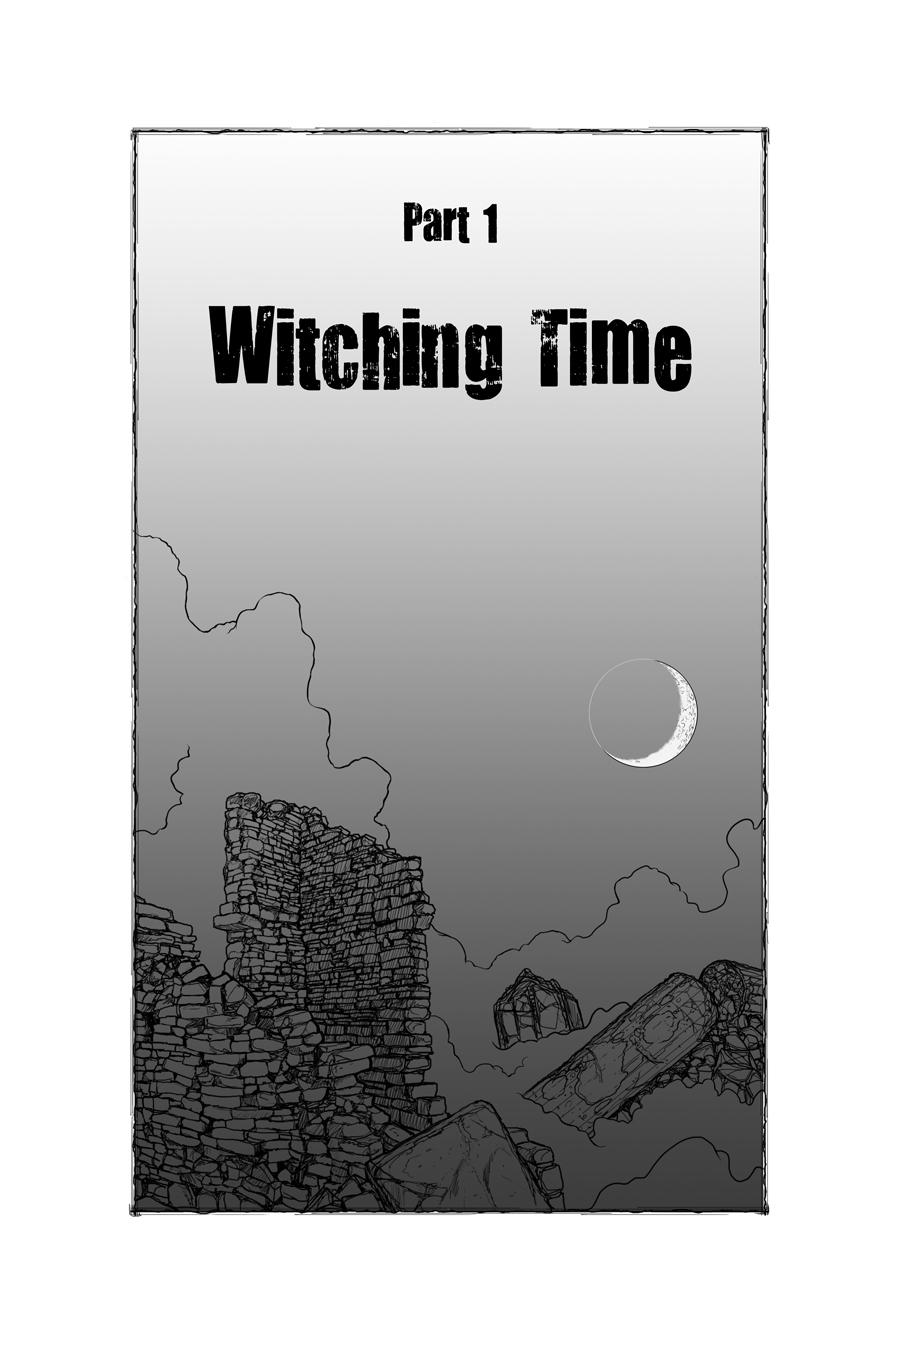 Part 1, "Witching Time" cover page